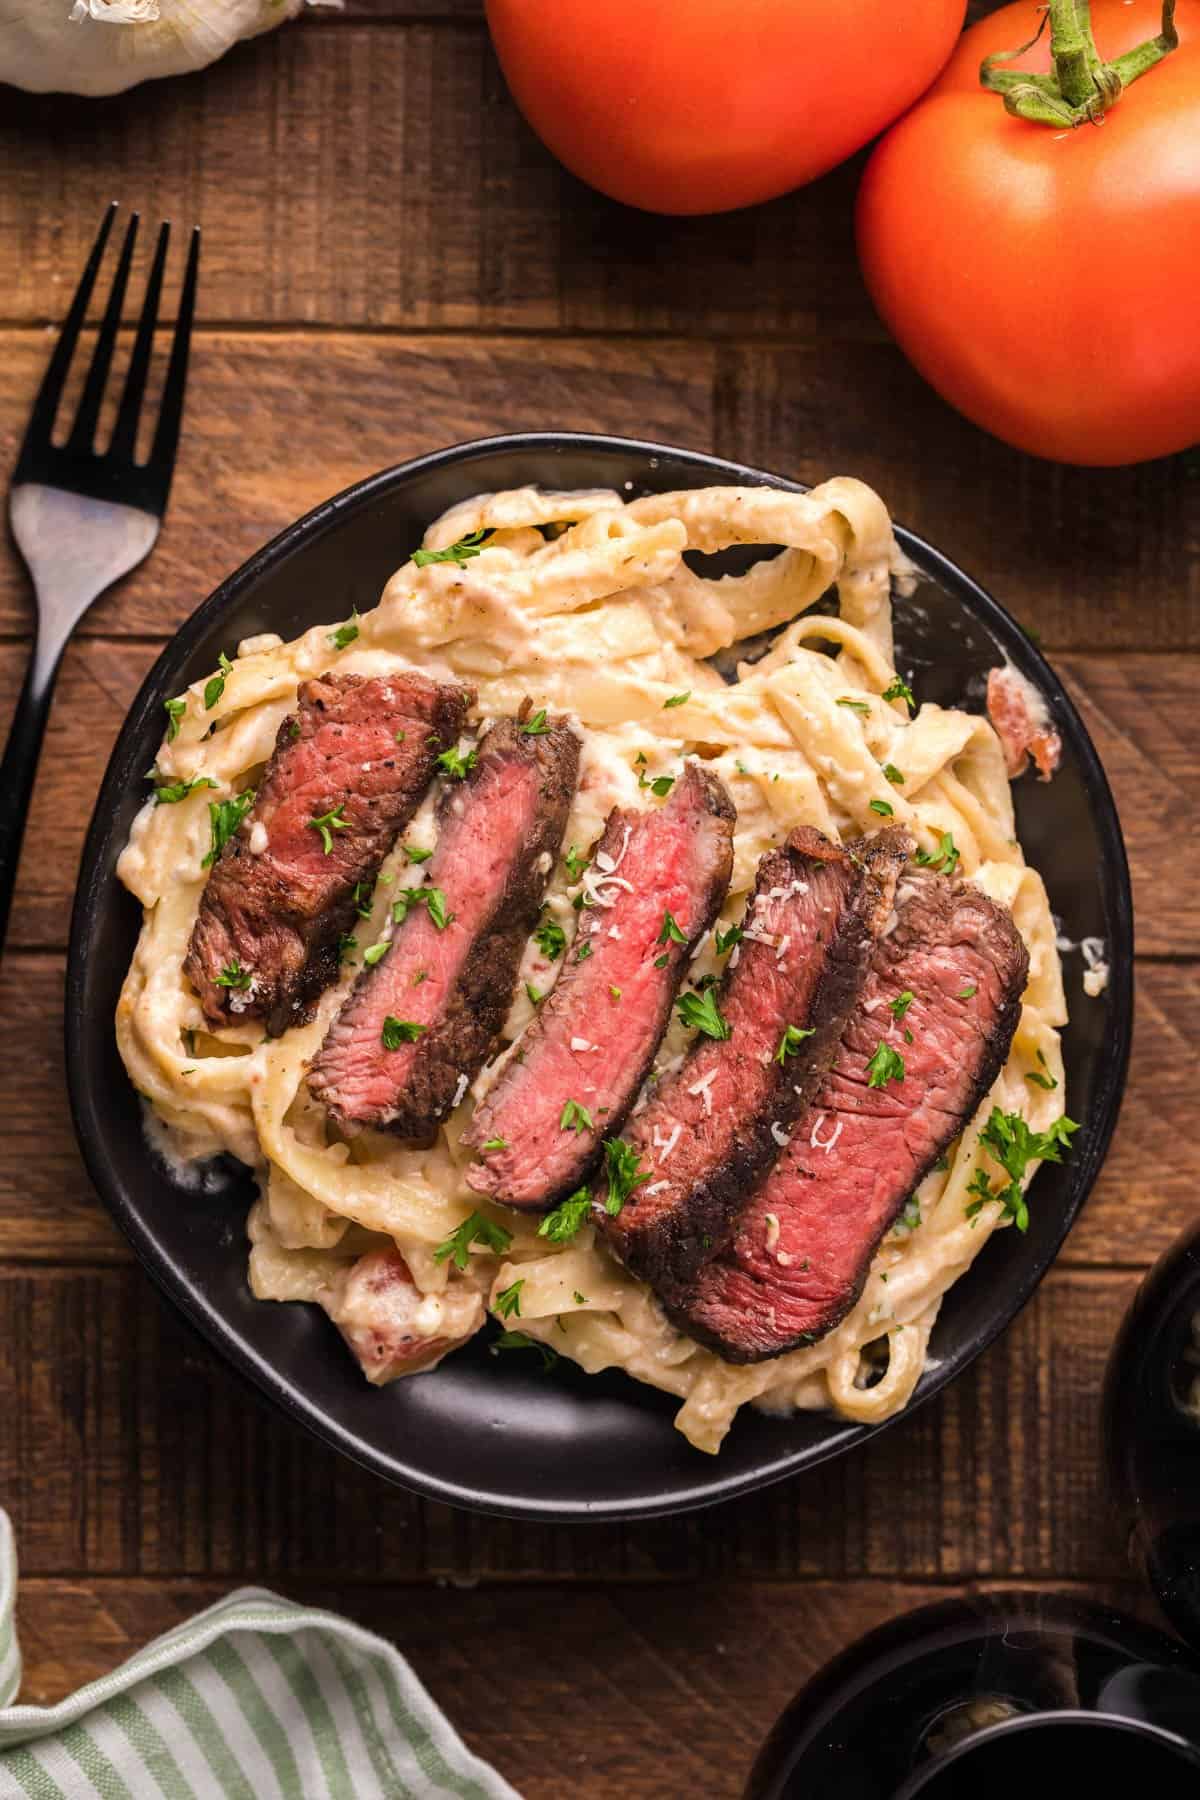 A plate of steak alfredo next to tomatoes and a fork.